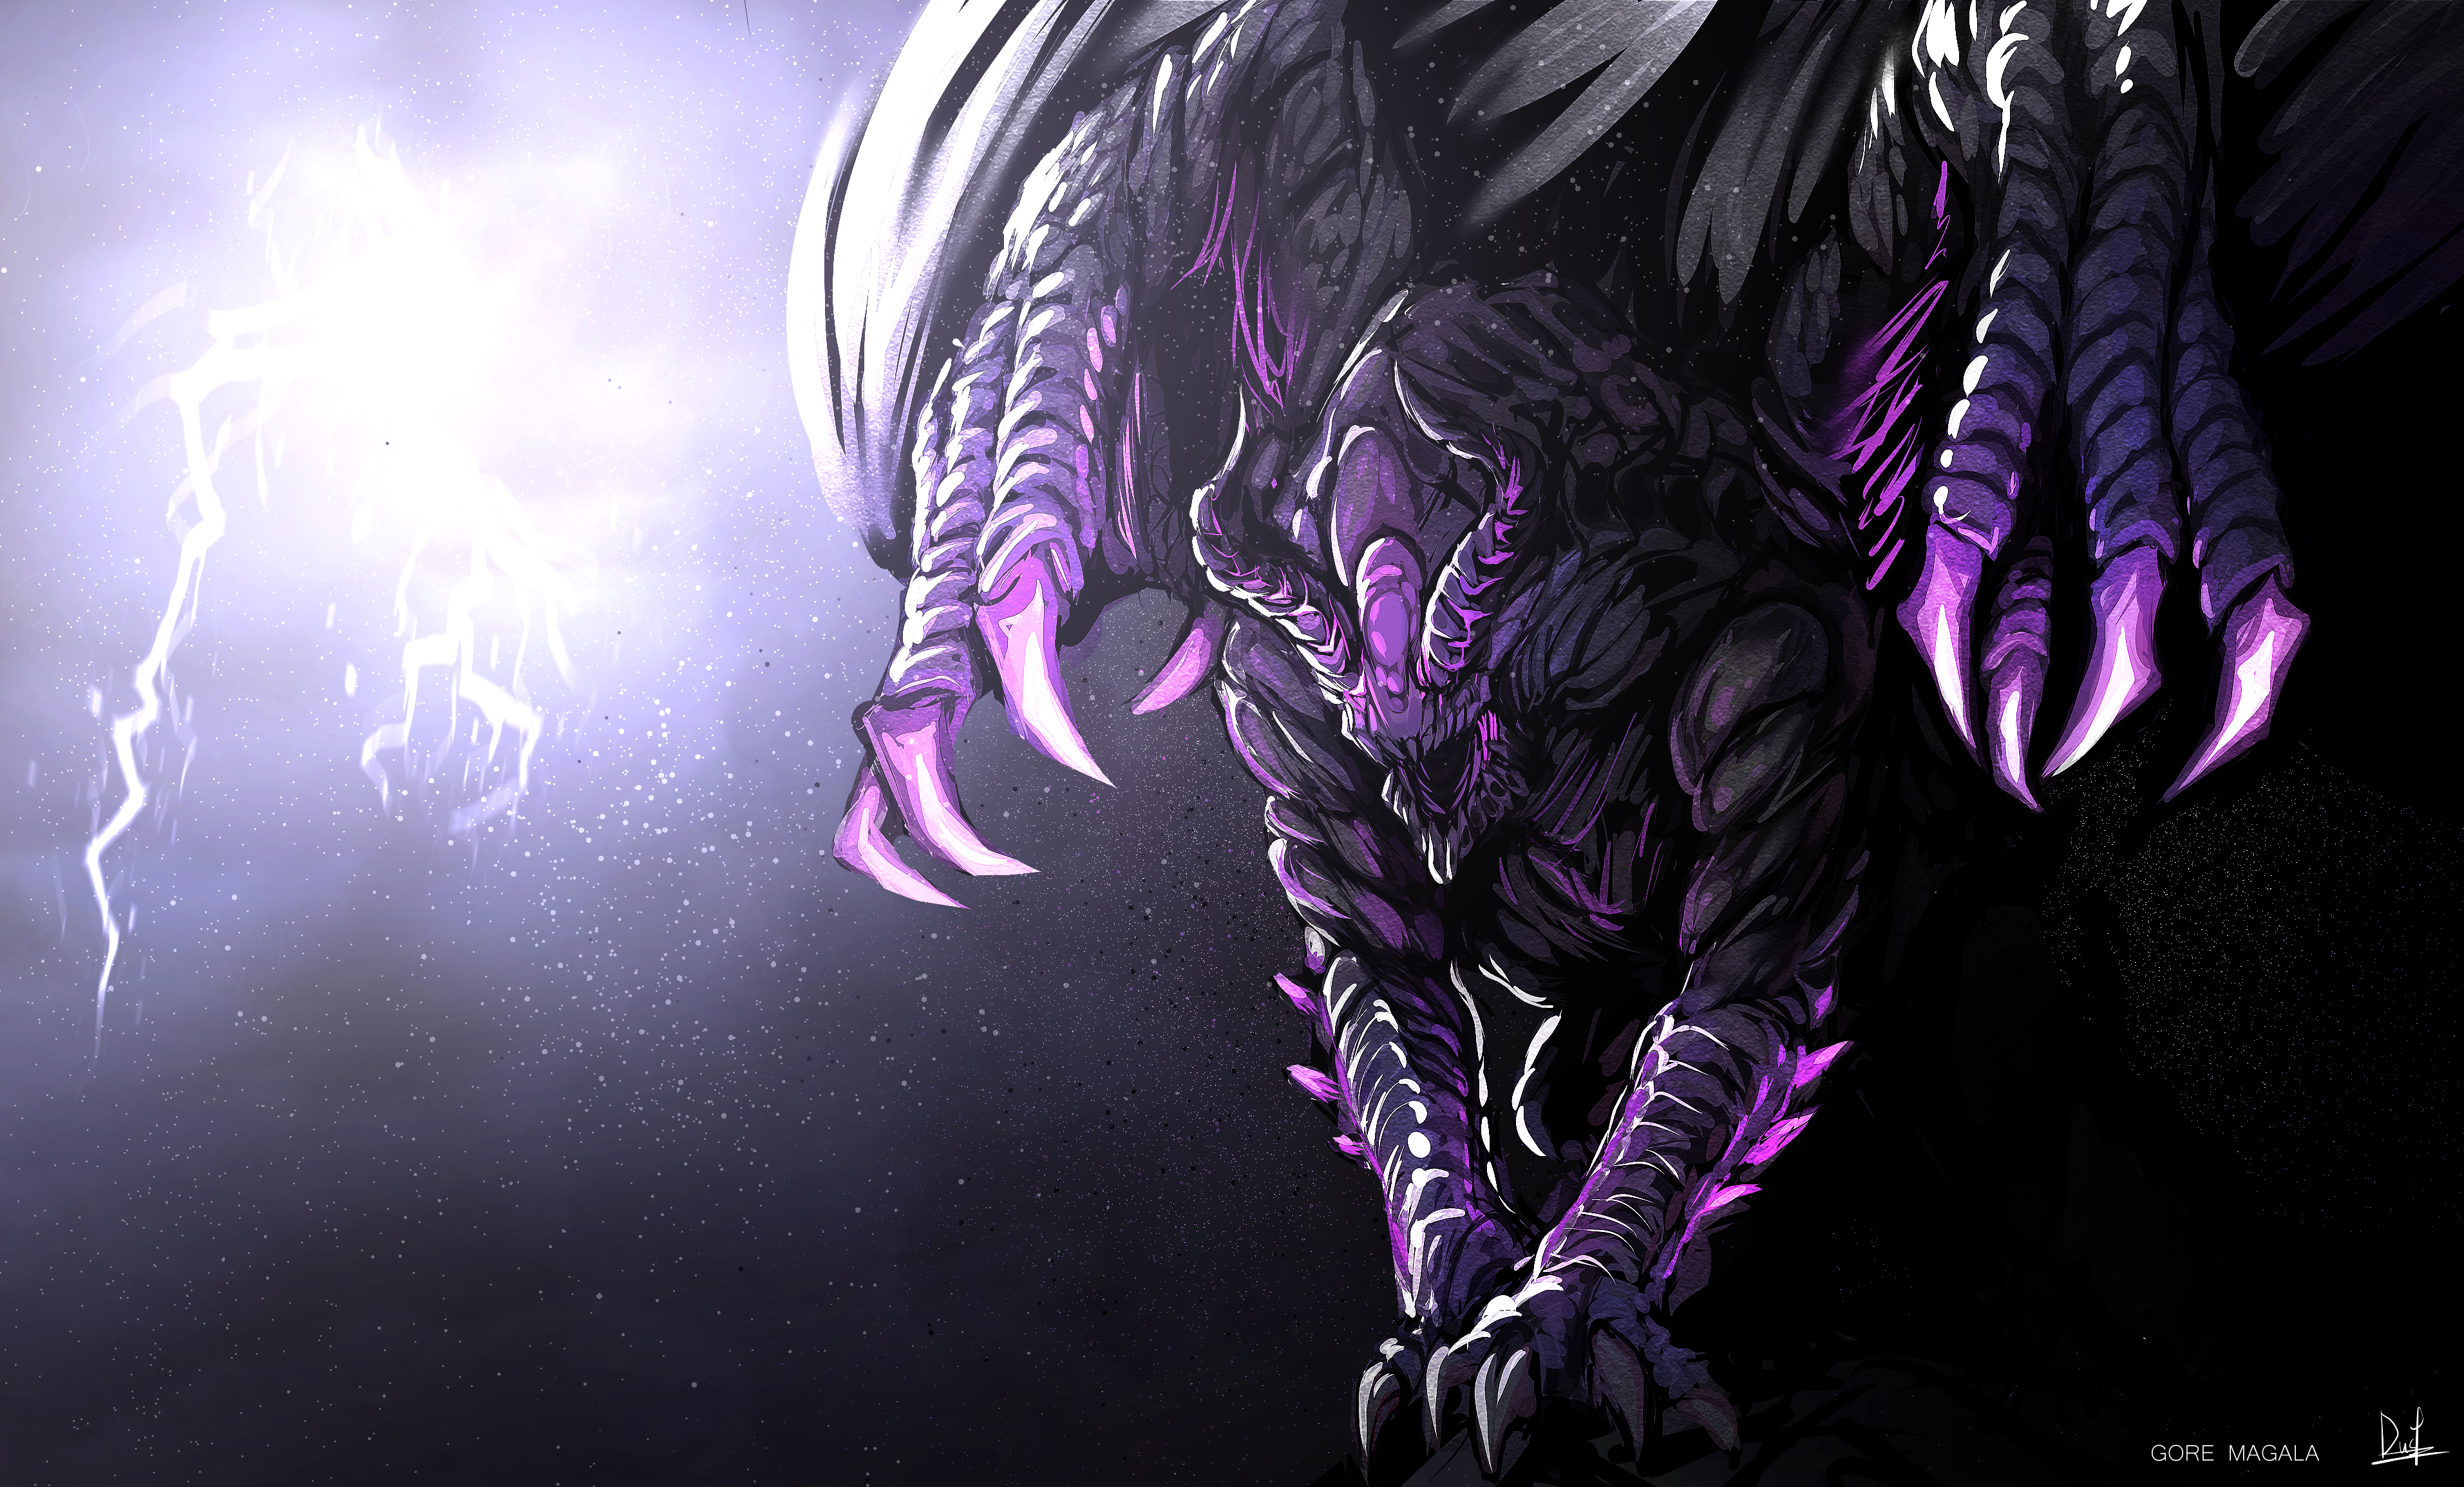 Darkned Sky, Gore Magala